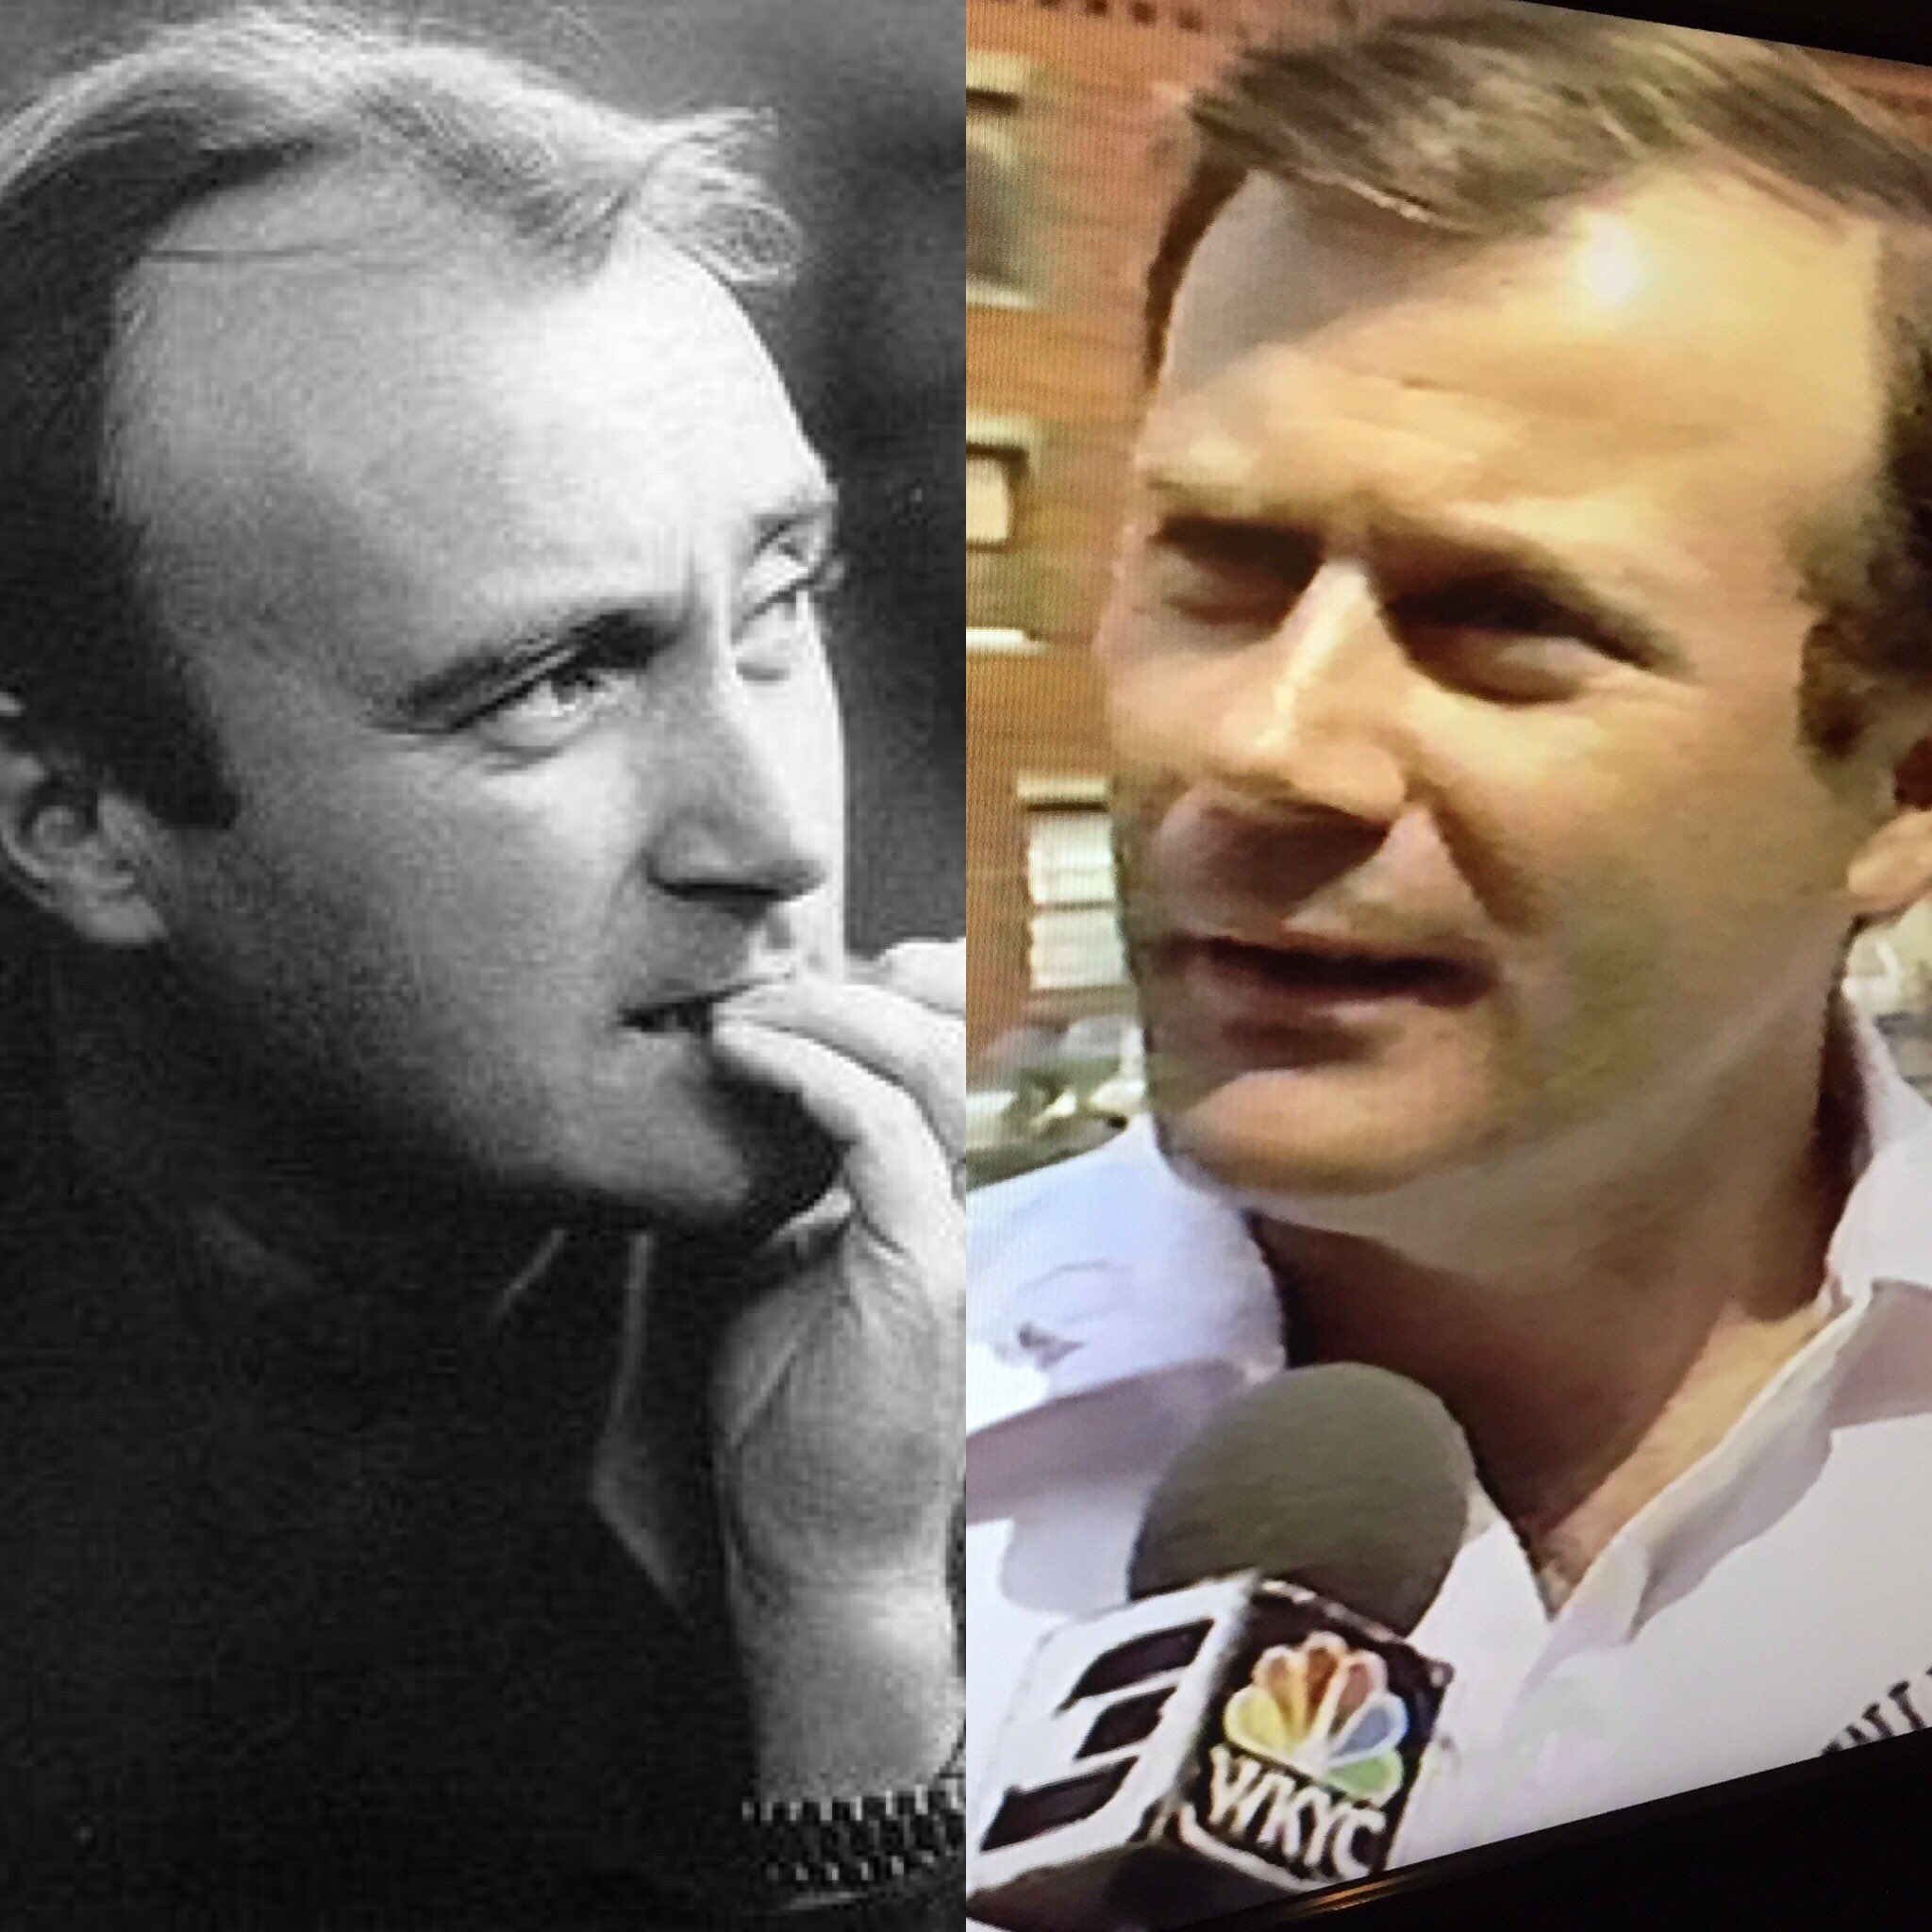 Happy Birthday Phil Collins ... who always had an uncanny resemblance to my dad!! 